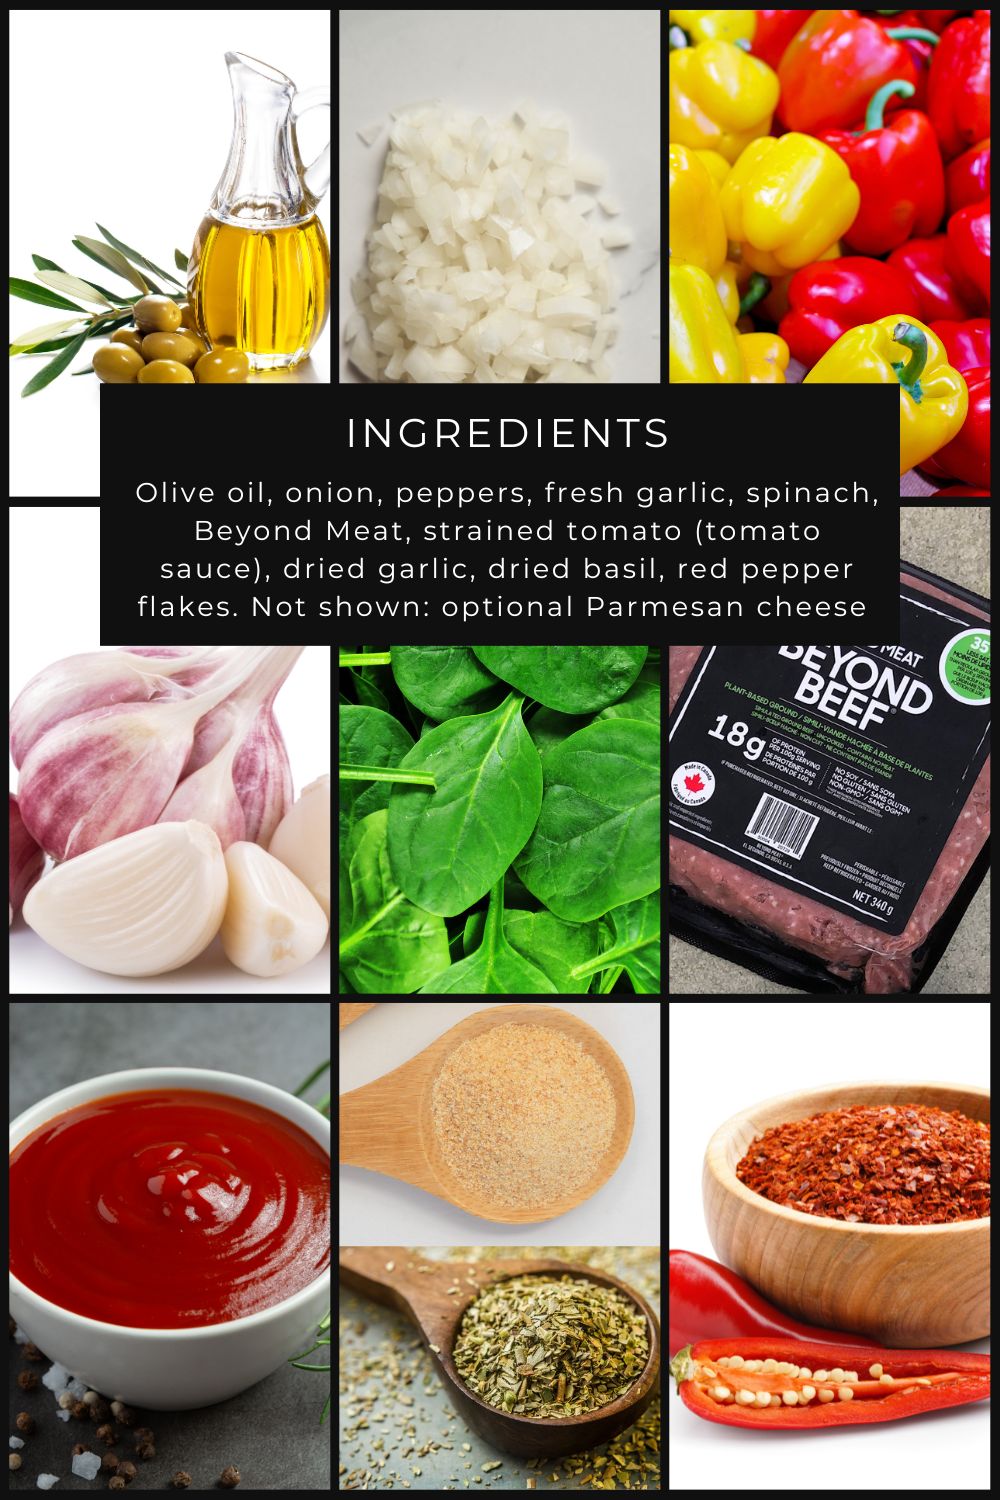 Ingredients for Beyond Meat Spaghetti Sauce